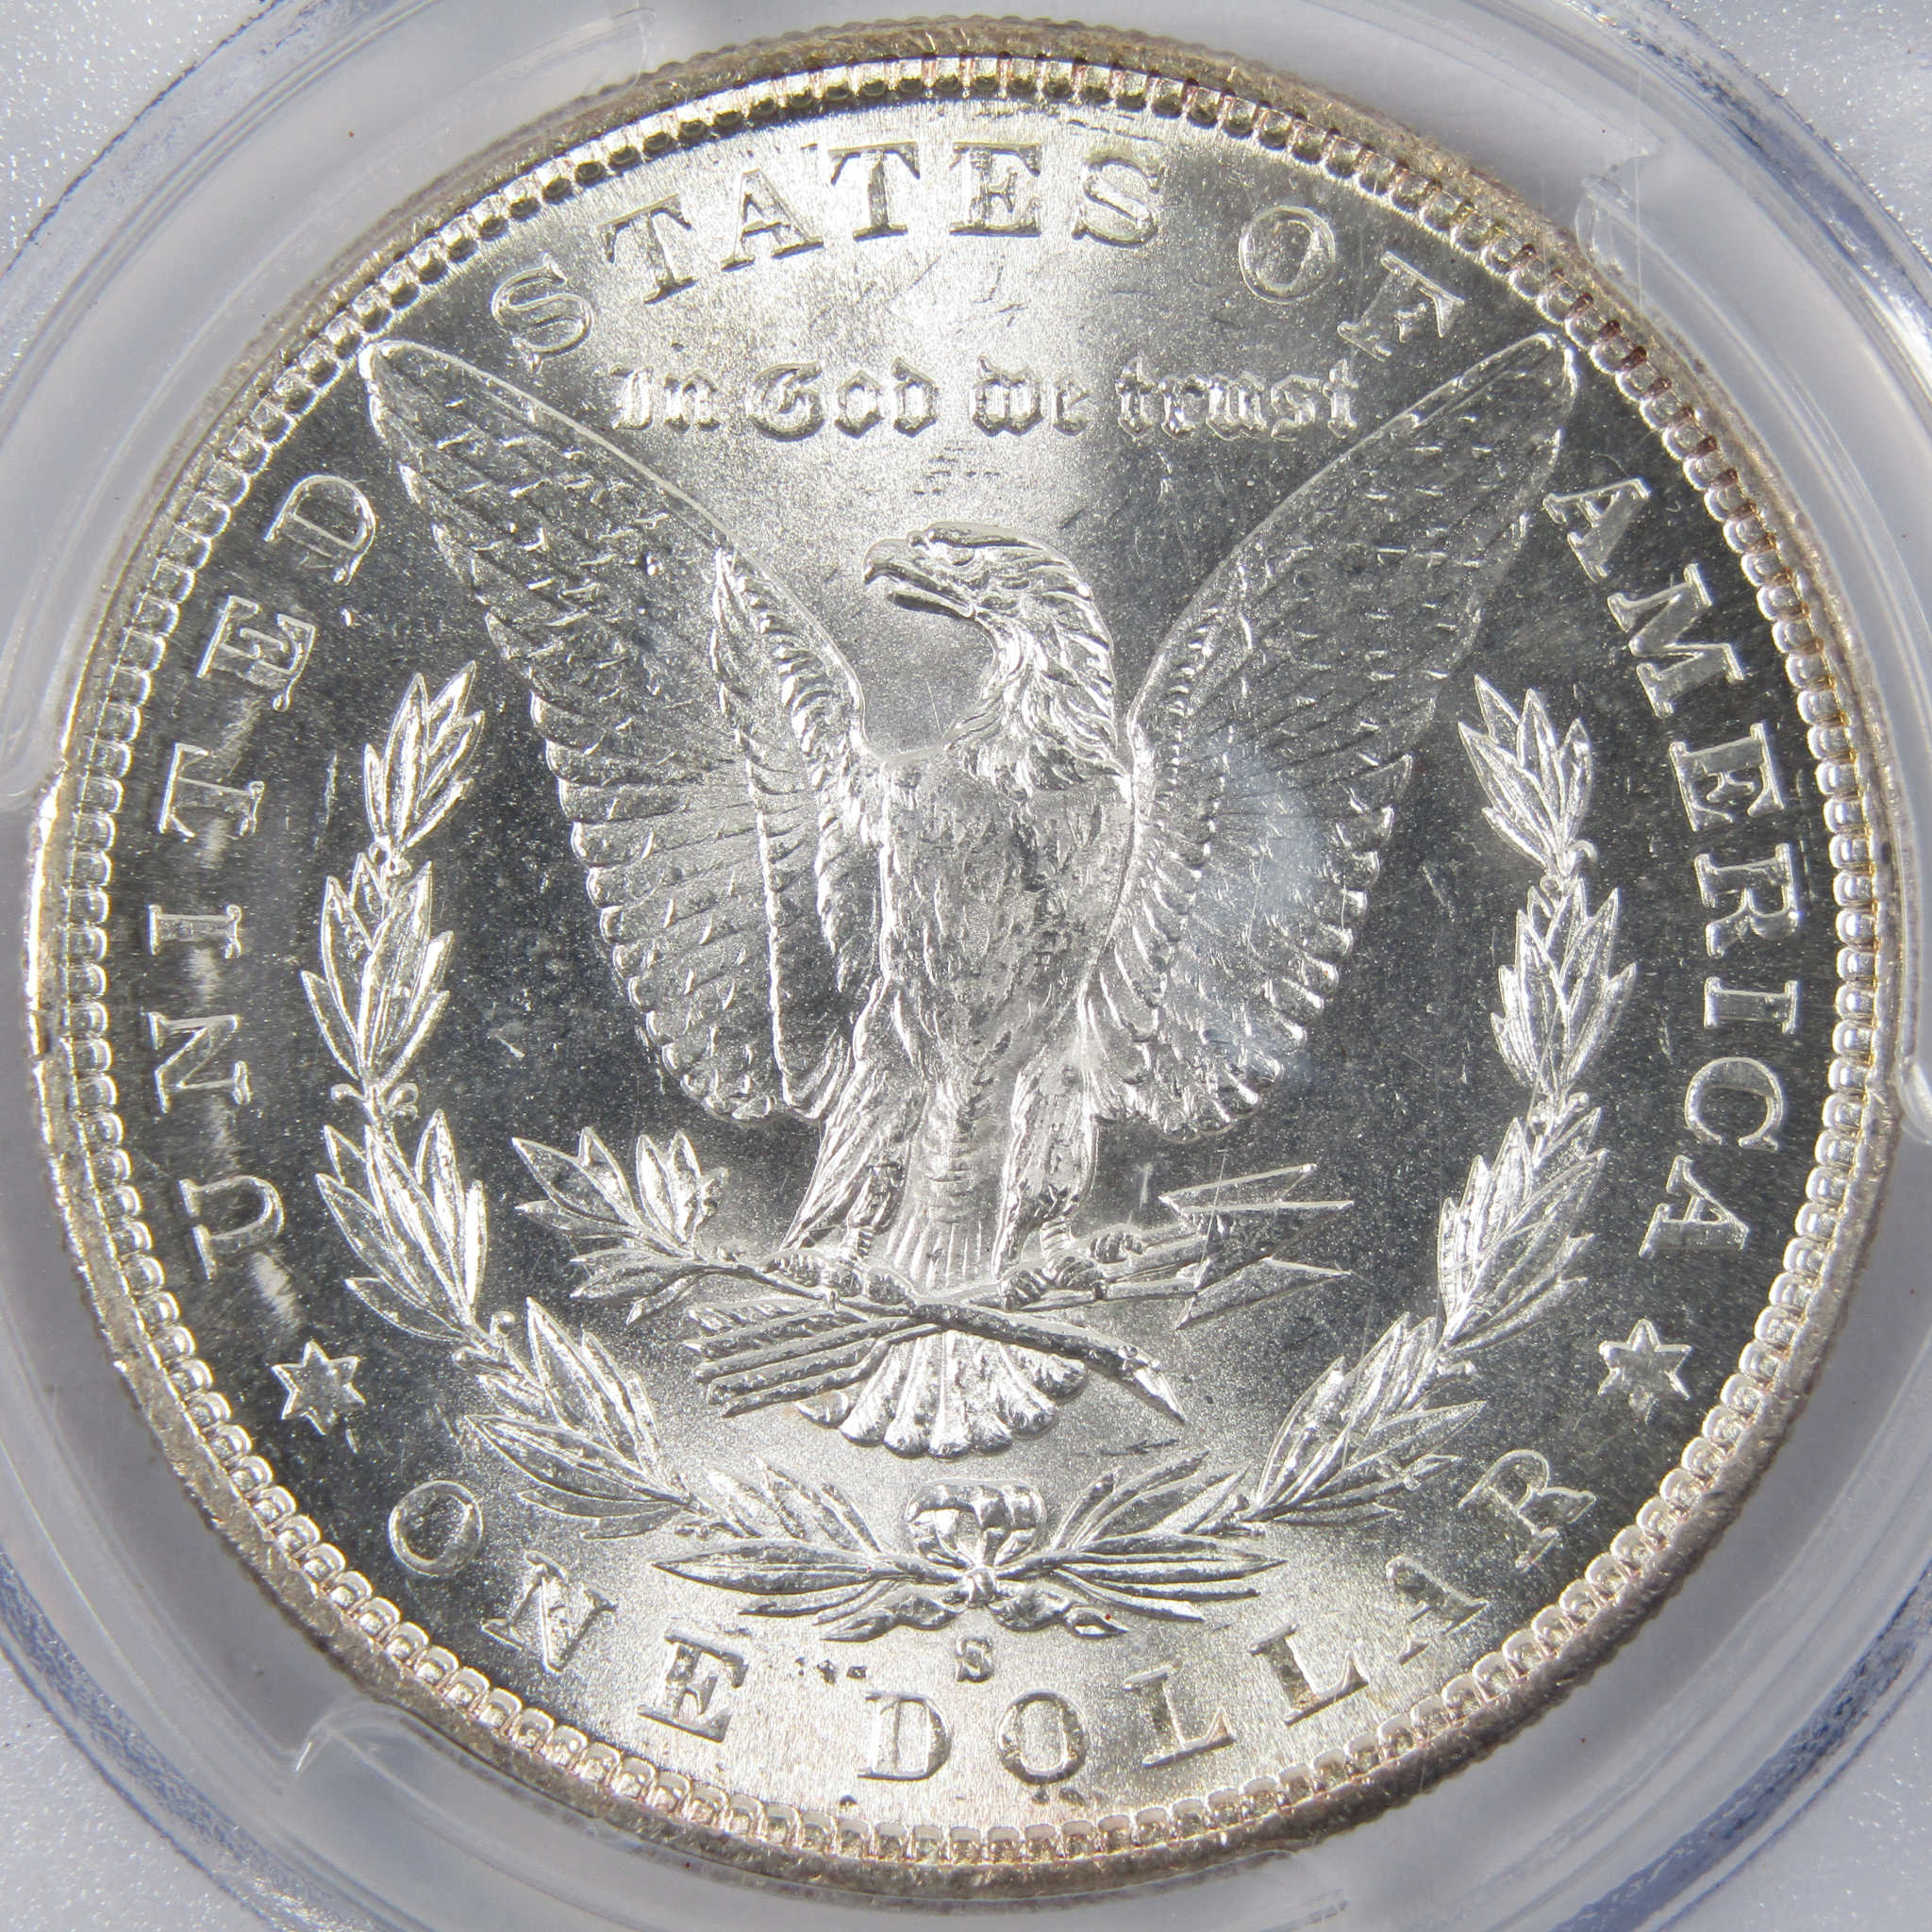 1885 S Morgan Dollar MS 64 PCGS 90% Silver $1 Coin SKU:I9736 - Morgan coin - Morgan silver dollar - Morgan silver dollar for sale - Profile Coins &amp; Collectibles